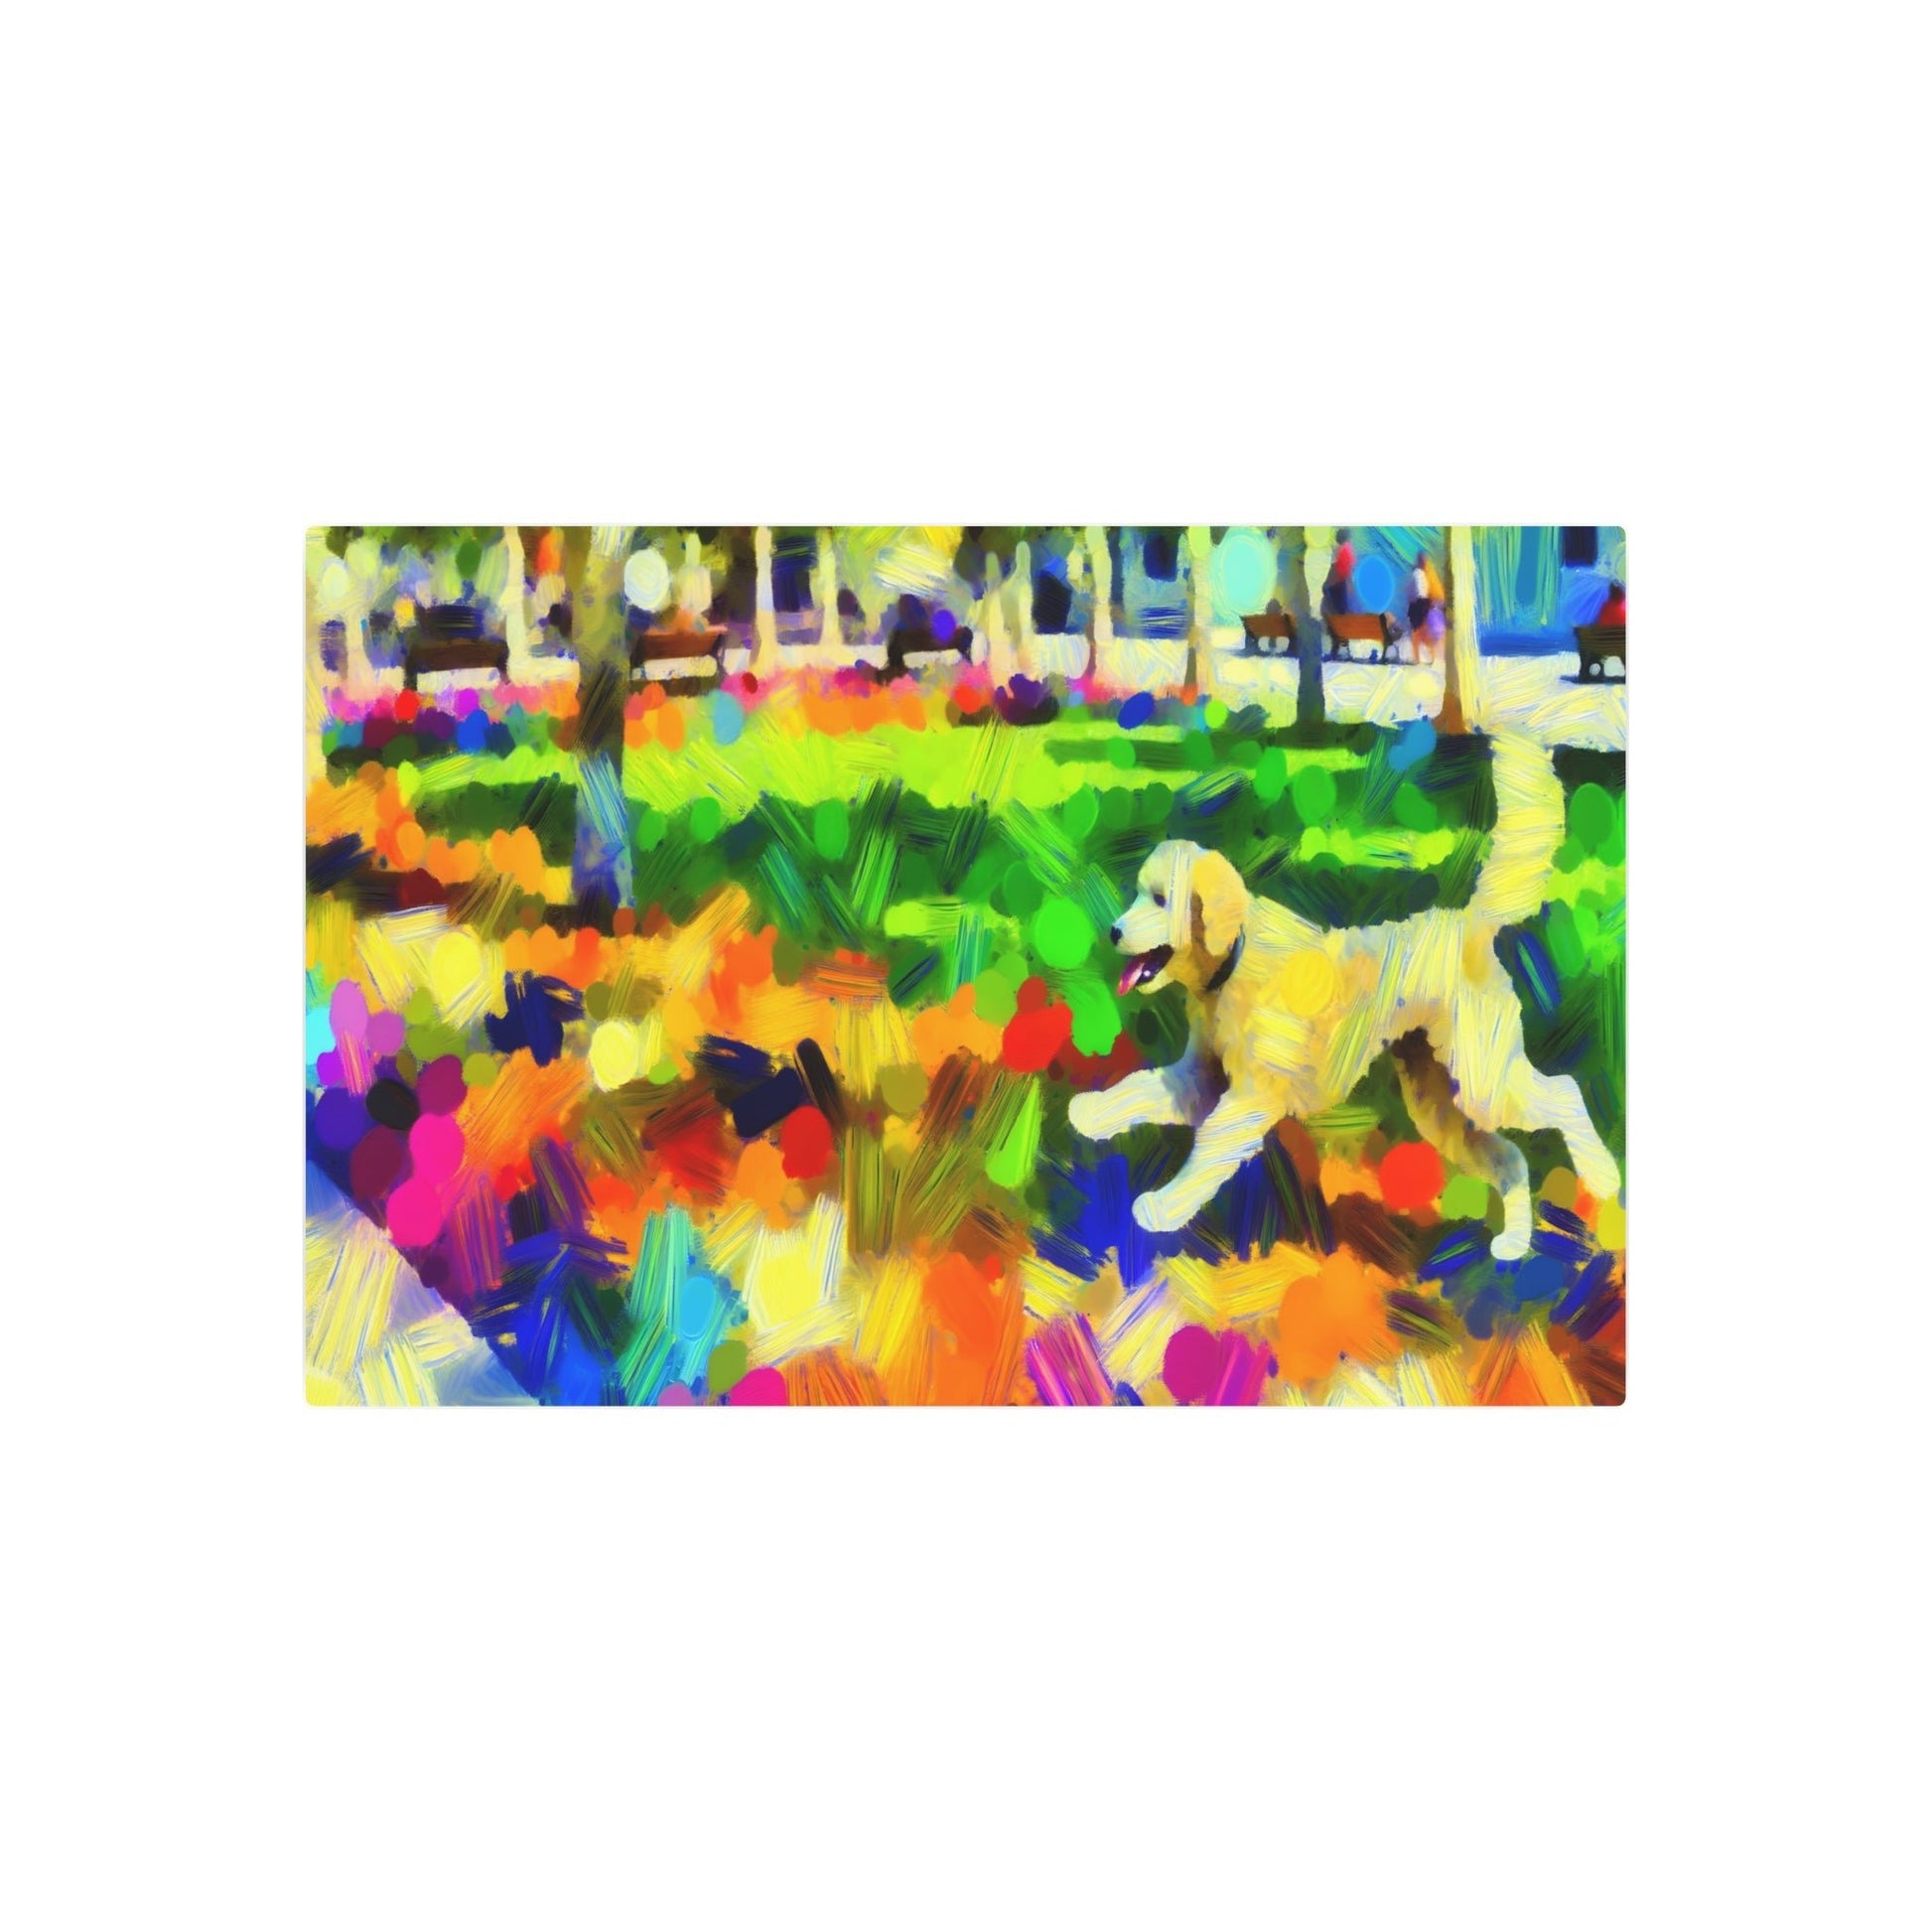 Metal Poster Art | "Impressionistic Western Art Style - Vibrant Colorful Brushstrokes of a Dog Playing in Sunny Park" - Metal Poster Art 36″ x 24″ (Horizontal) 0.12''